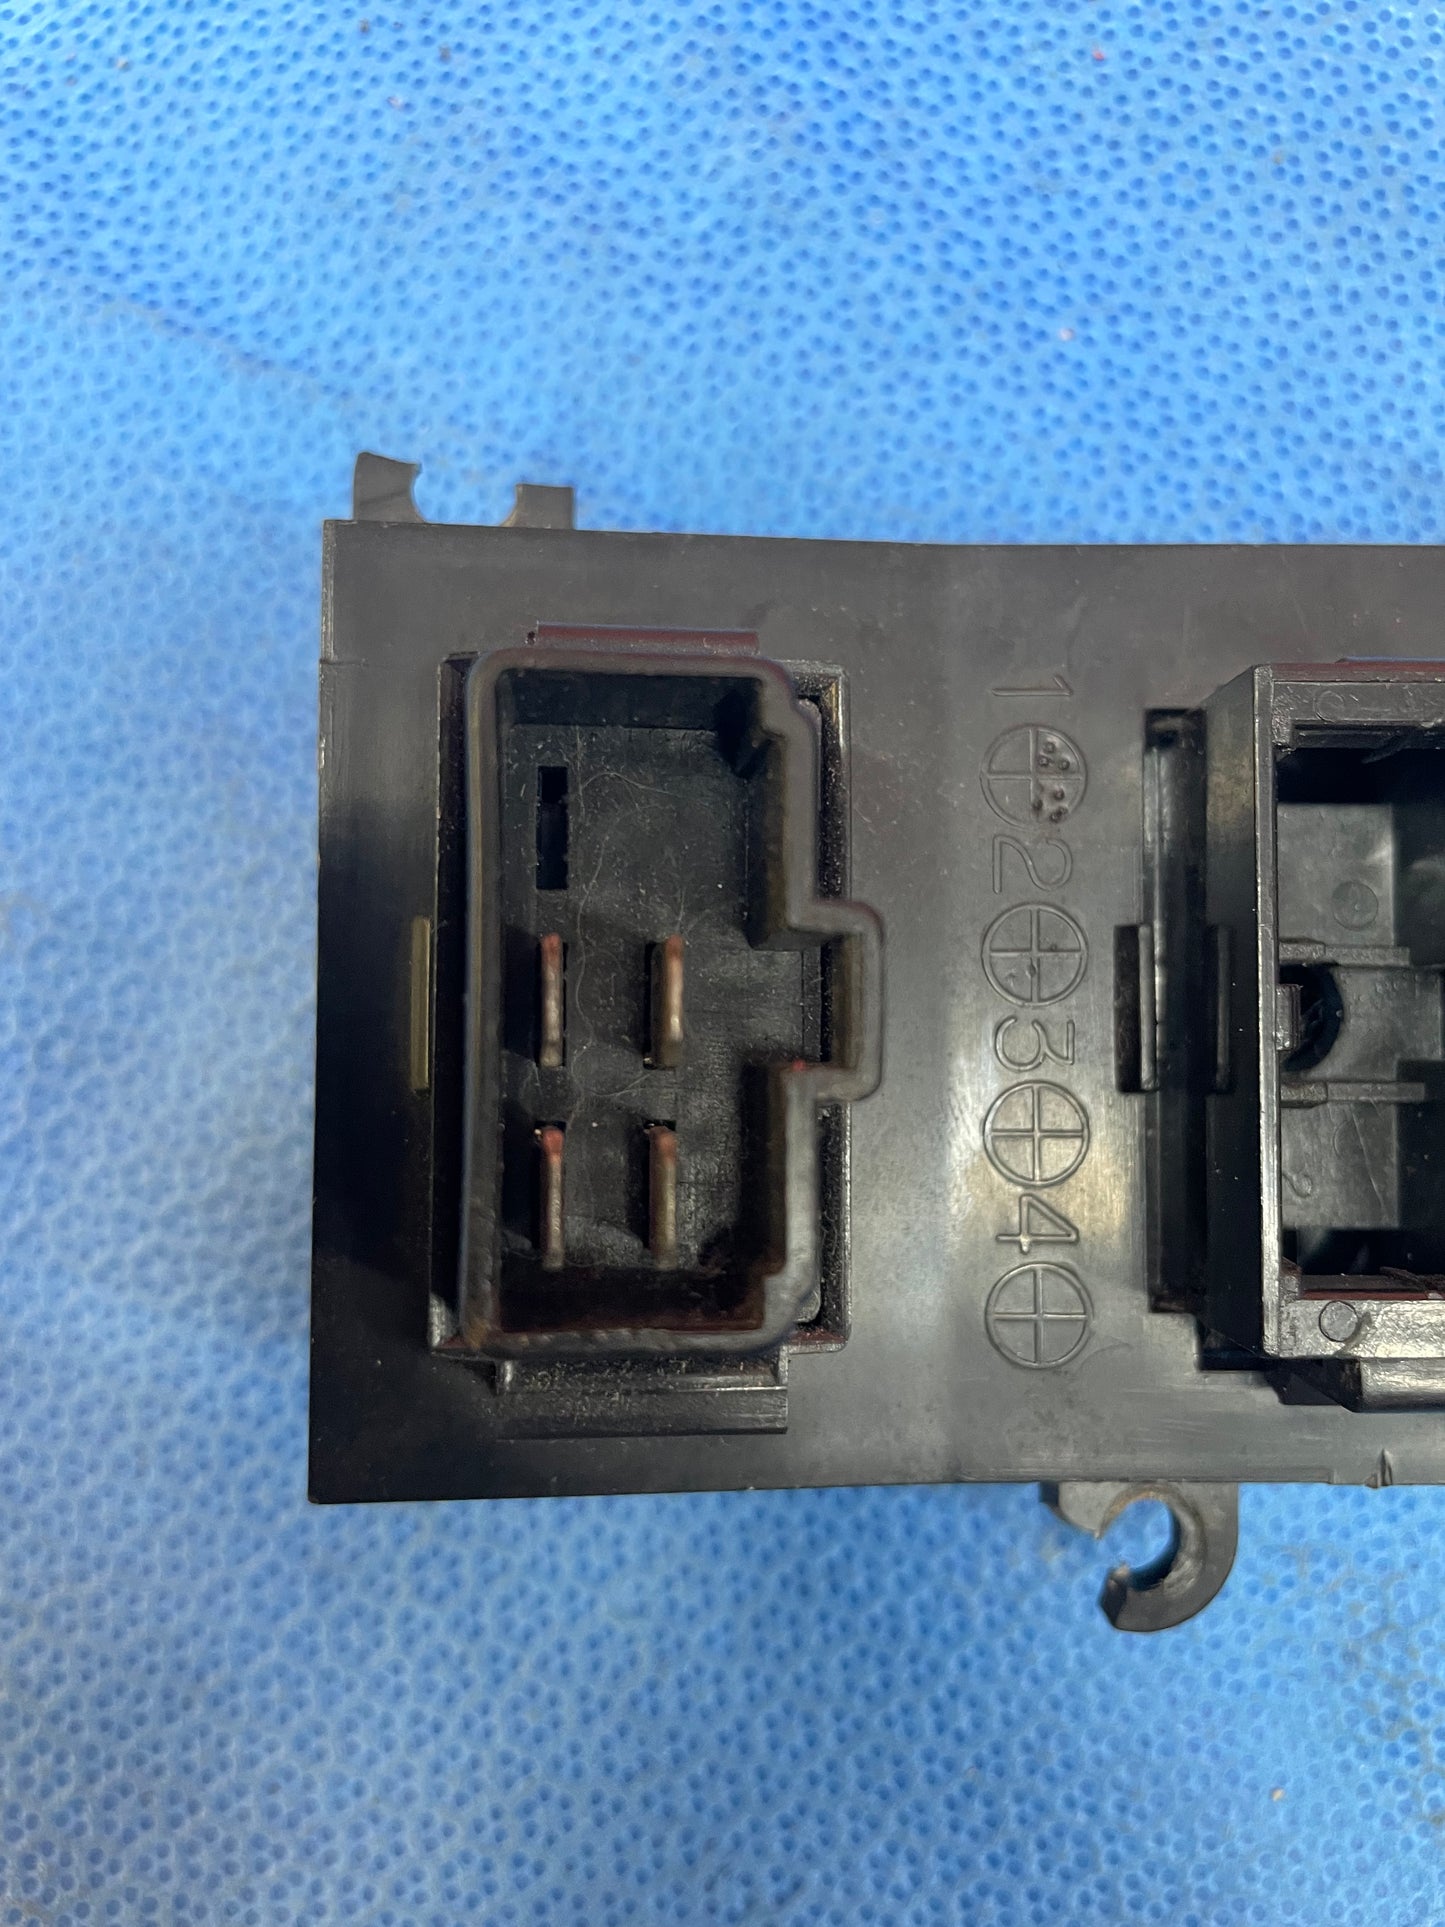 LHD Switch Panel with Fog light switch defroster and blank switch for toggle FD01 66 468 Mazda Rx7 FD3S FD S4B1FLSP